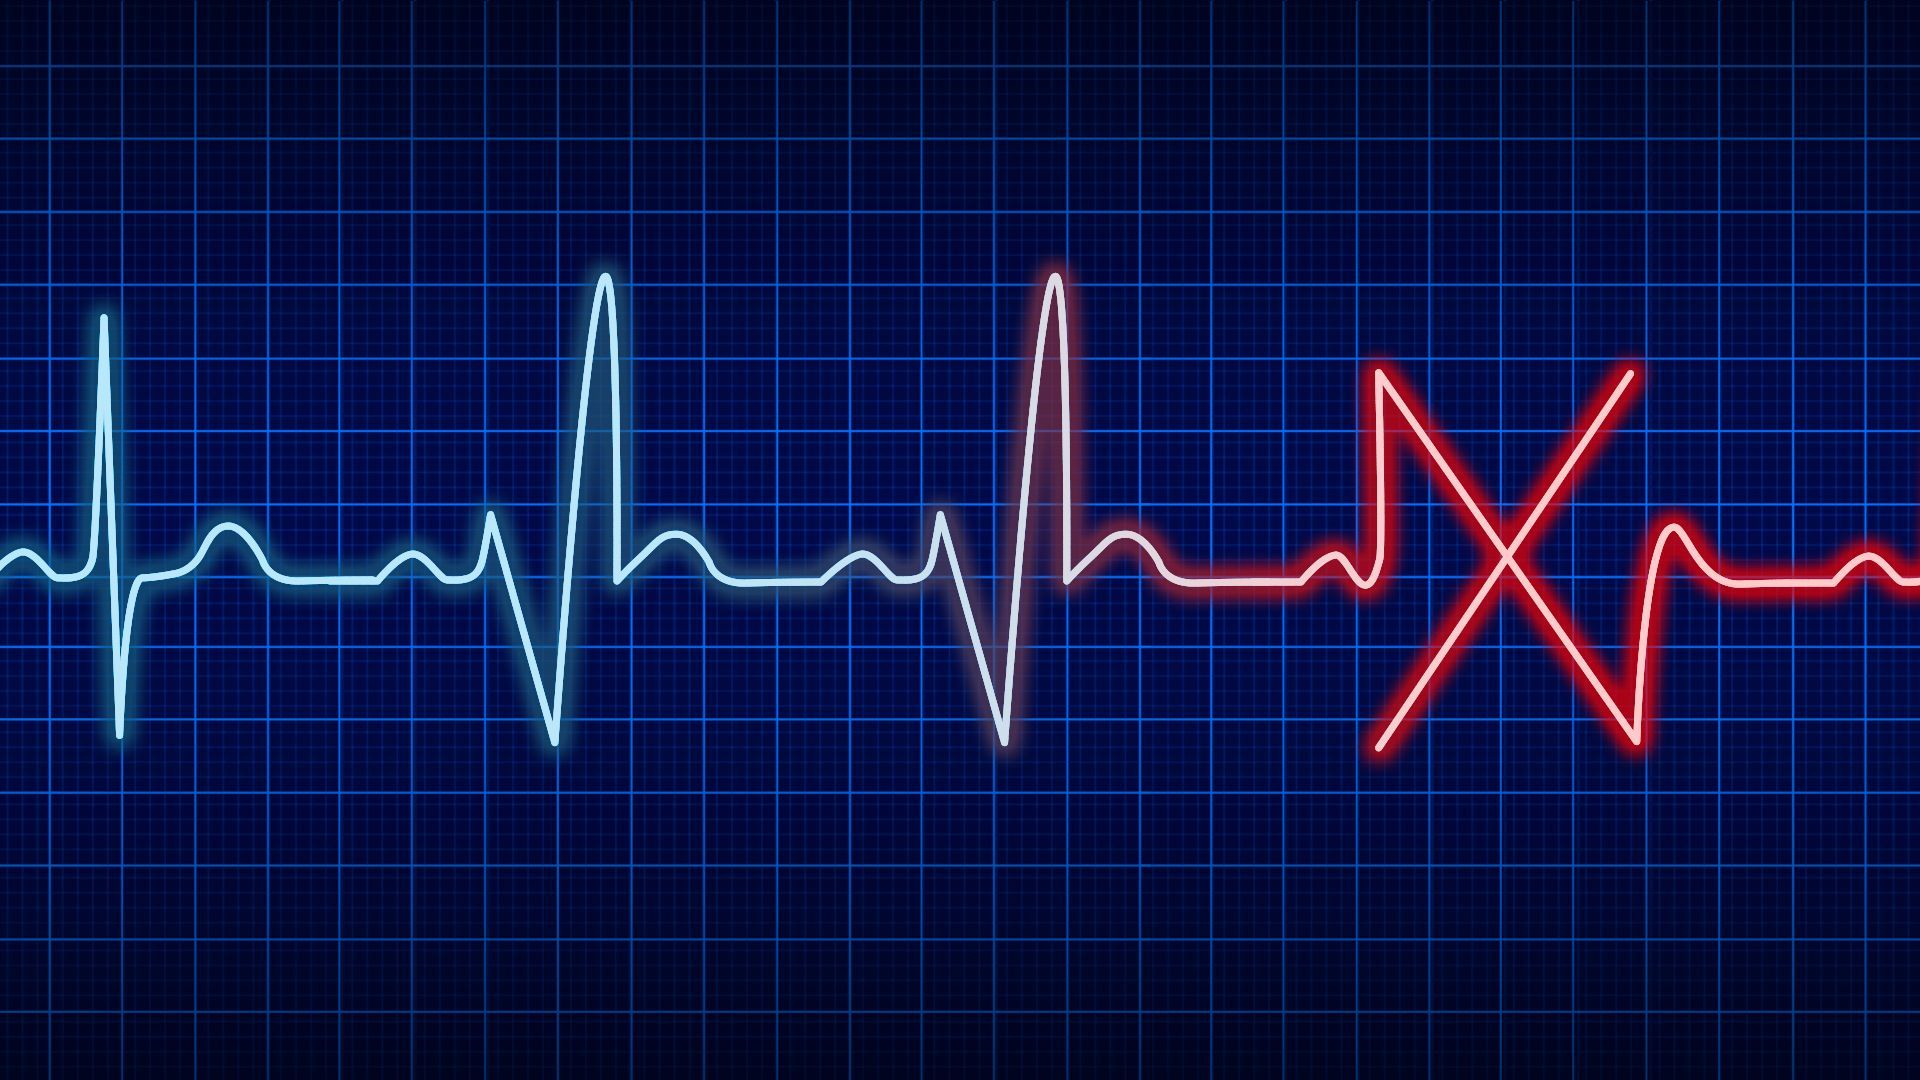 Illustration of an EKG wave resembling blue check marks followed by a red "x."